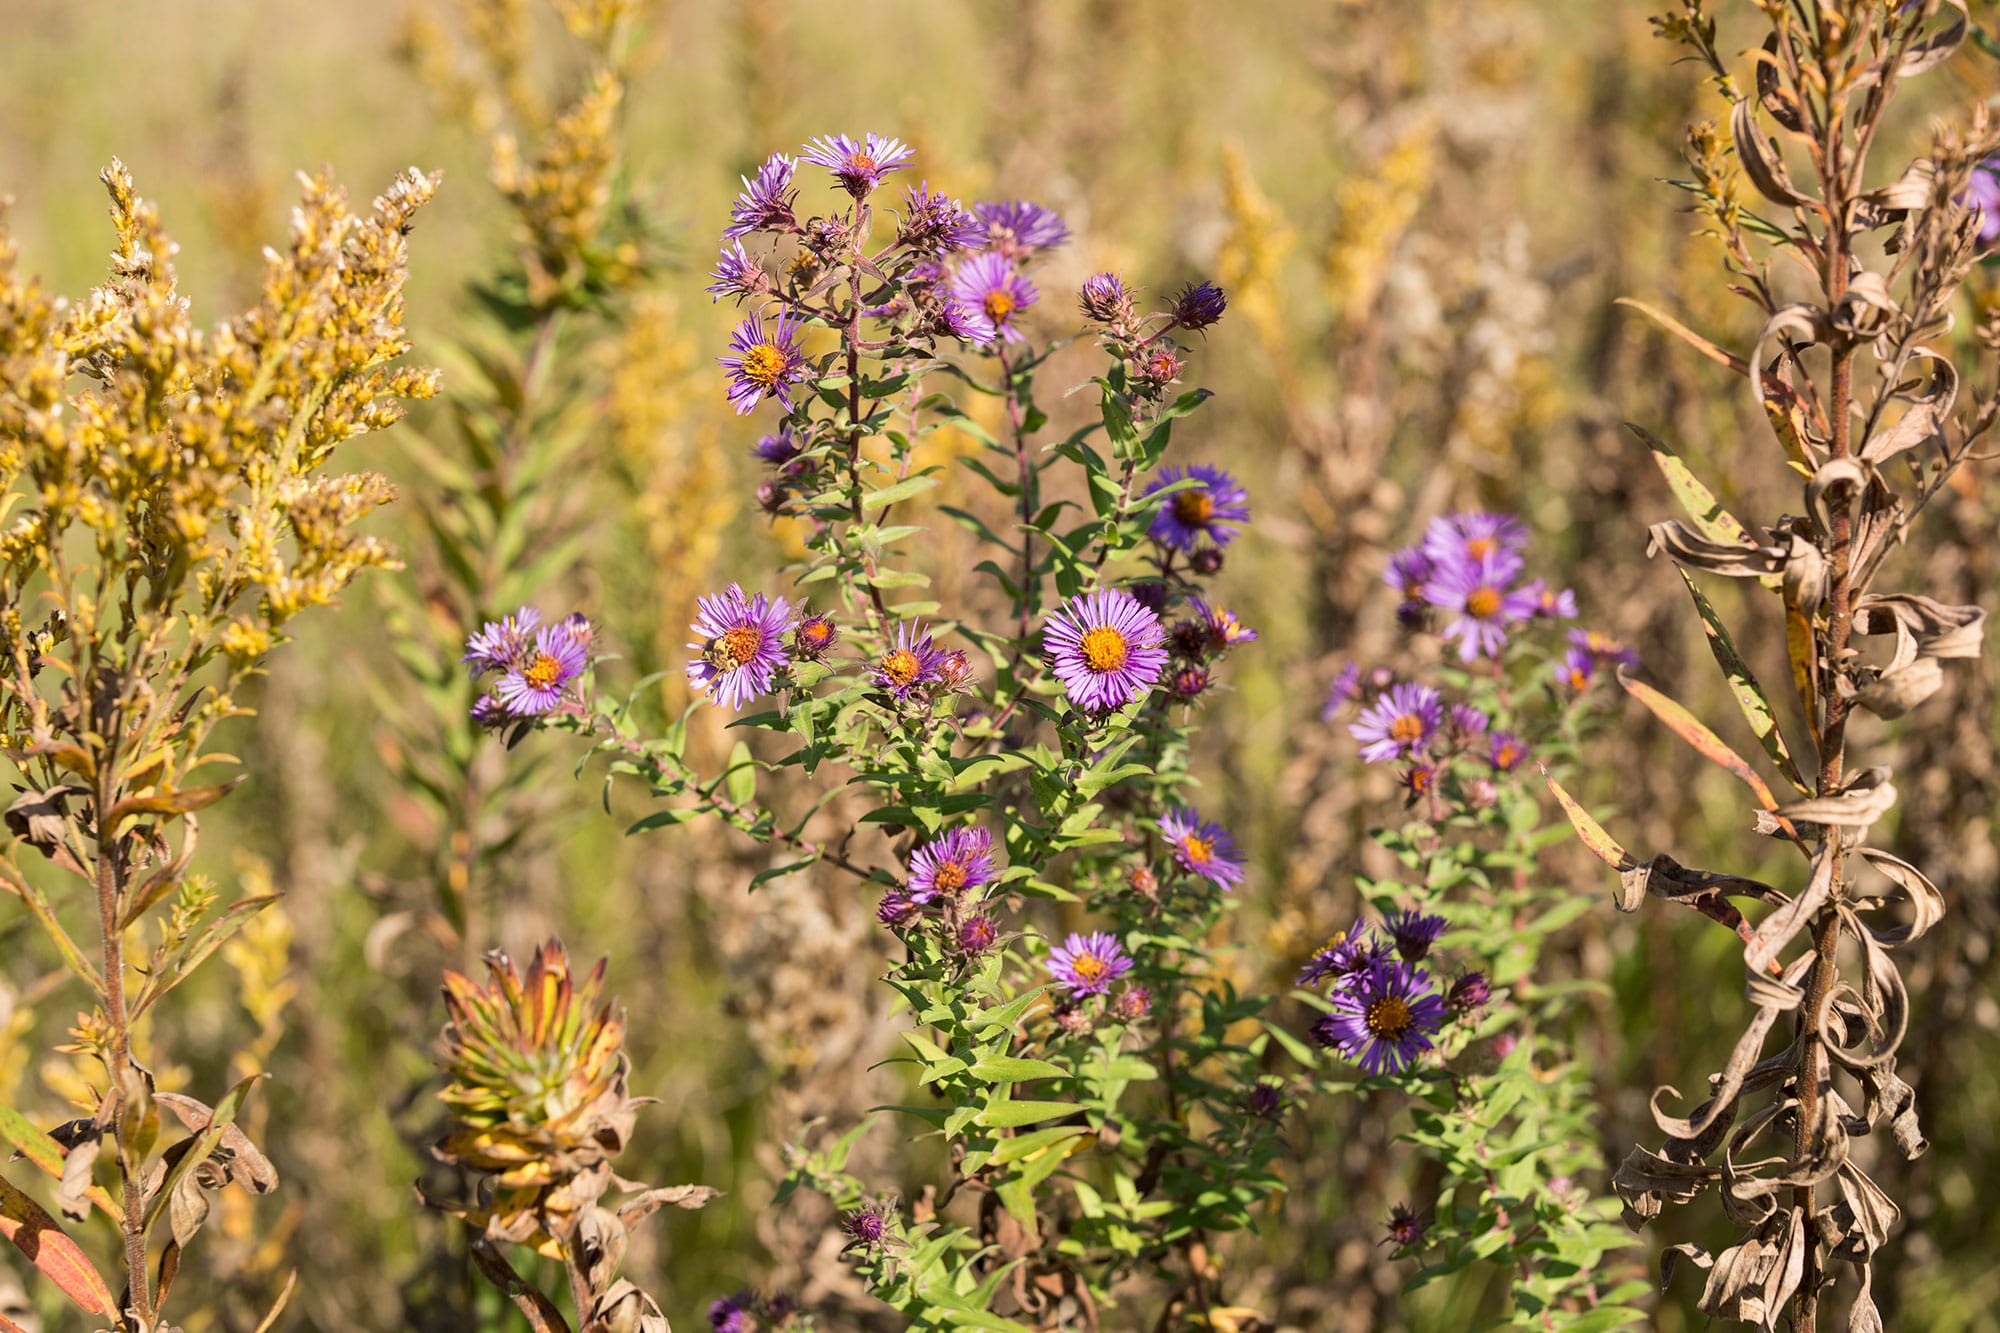 Wildflowers in a field with brown grass and purple flowers.